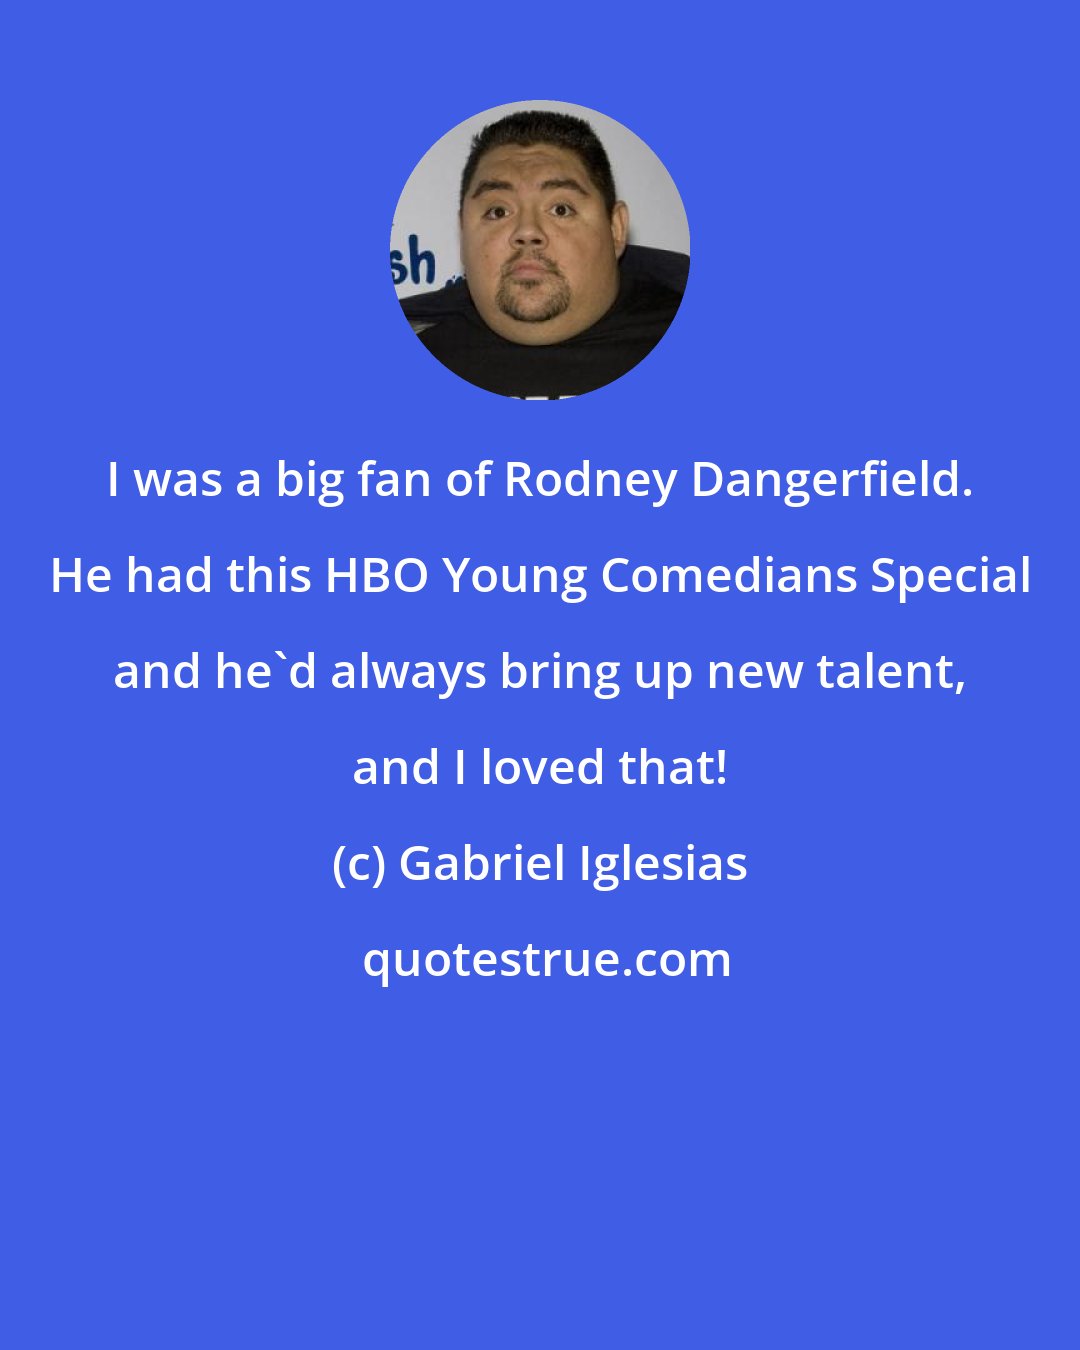 Gabriel Iglesias: I was a big fan of Rodney Dangerfield. He had this HBO Young Comedians Special and he'd always bring up new talent, and I loved that!